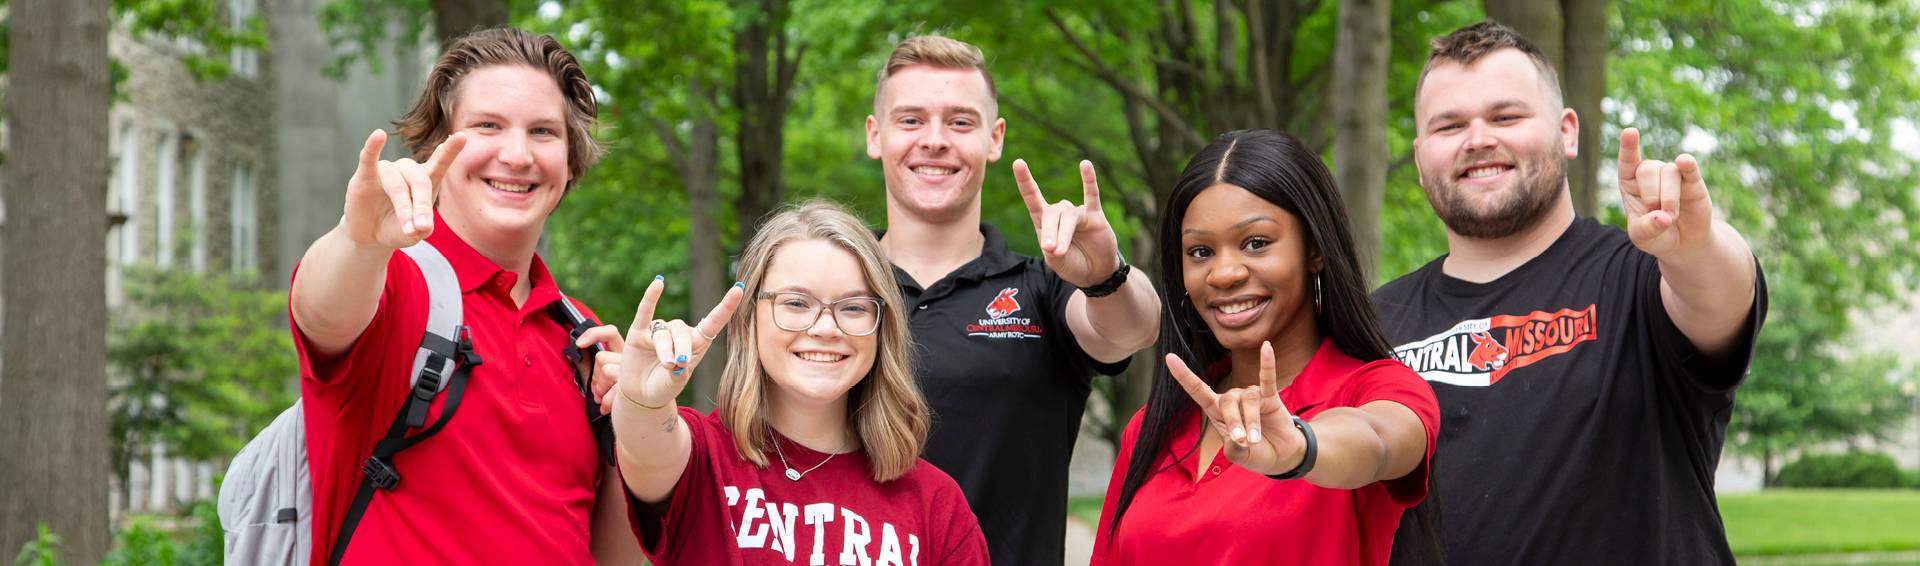 UCM students giving the "snouts out" hand signal